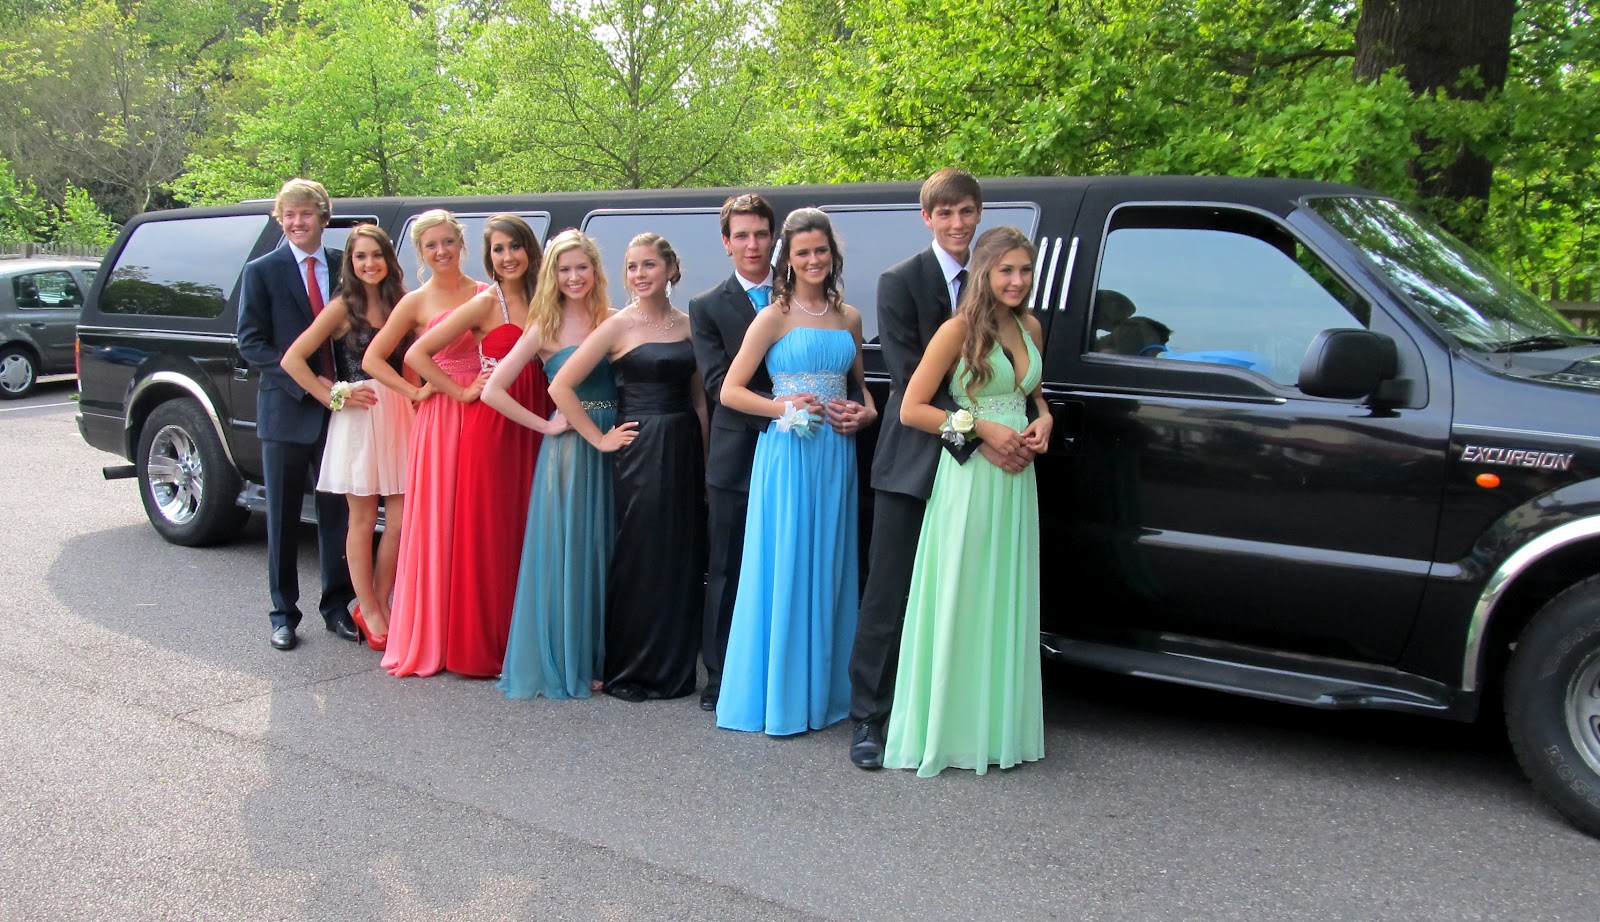 Best Prom Limo and Car Service in Arlington, Alexandria and Fairfax!